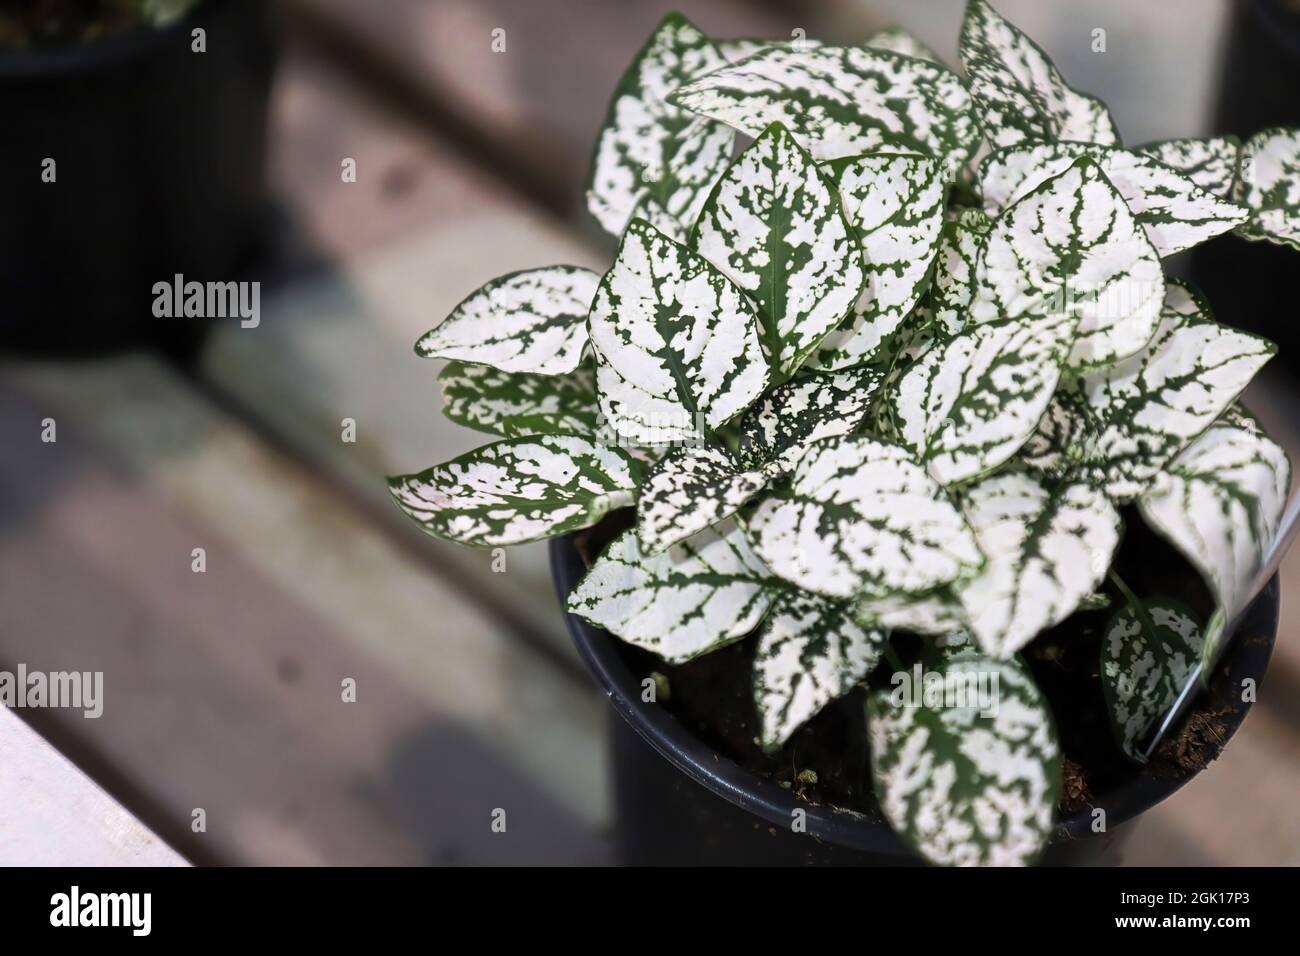 White leaves on a potted polka dot plant Stock Photo